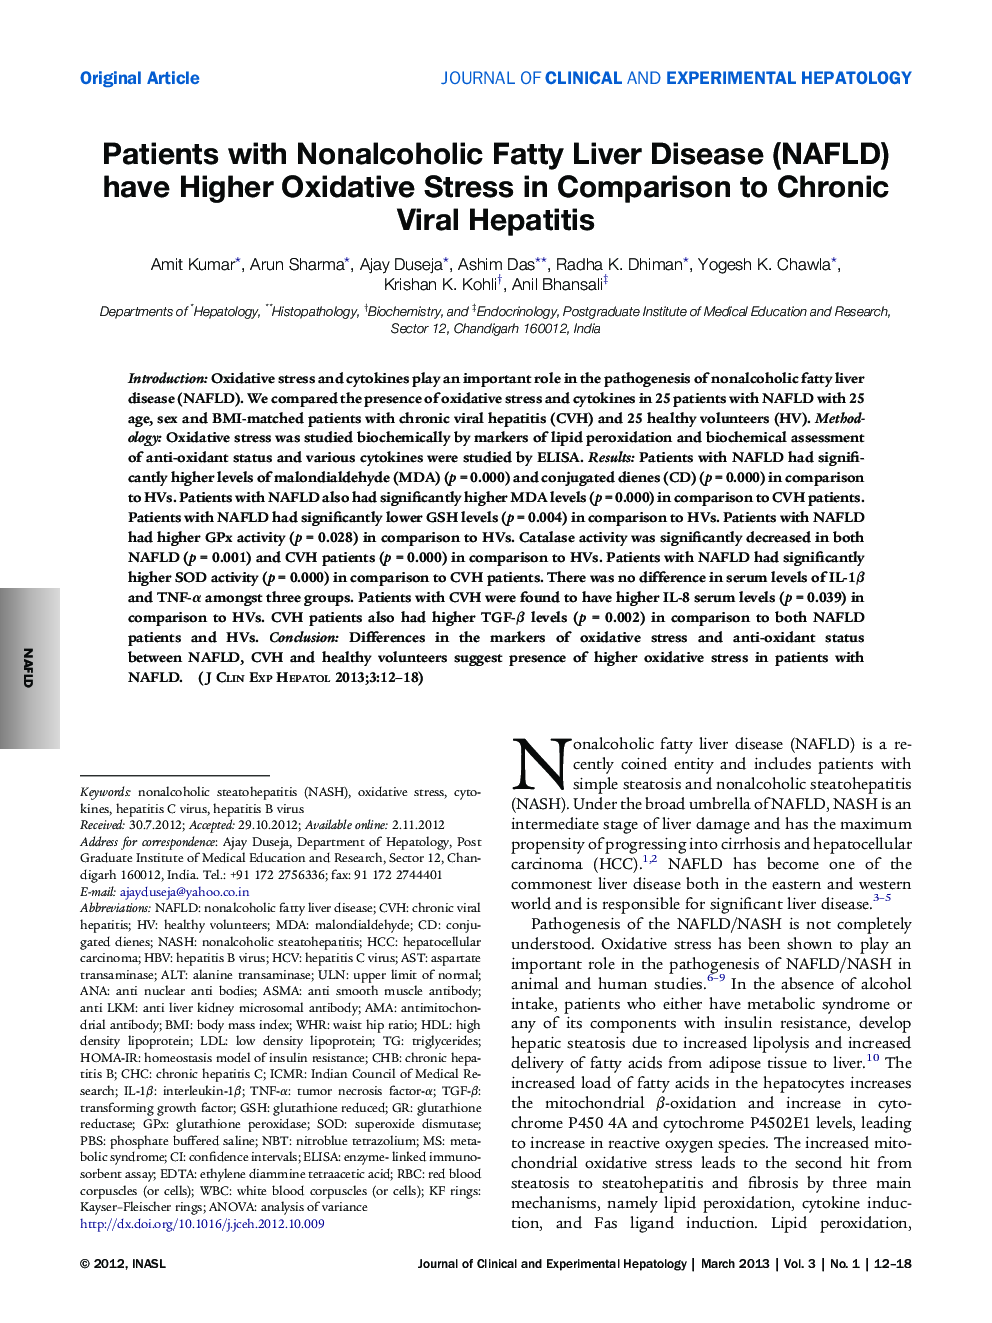 Patients with Nonalcoholic Fatty Liver Disease (NAFLD) have Higher Oxidative Stress in Comparison to Chronic Viral Hepatitis